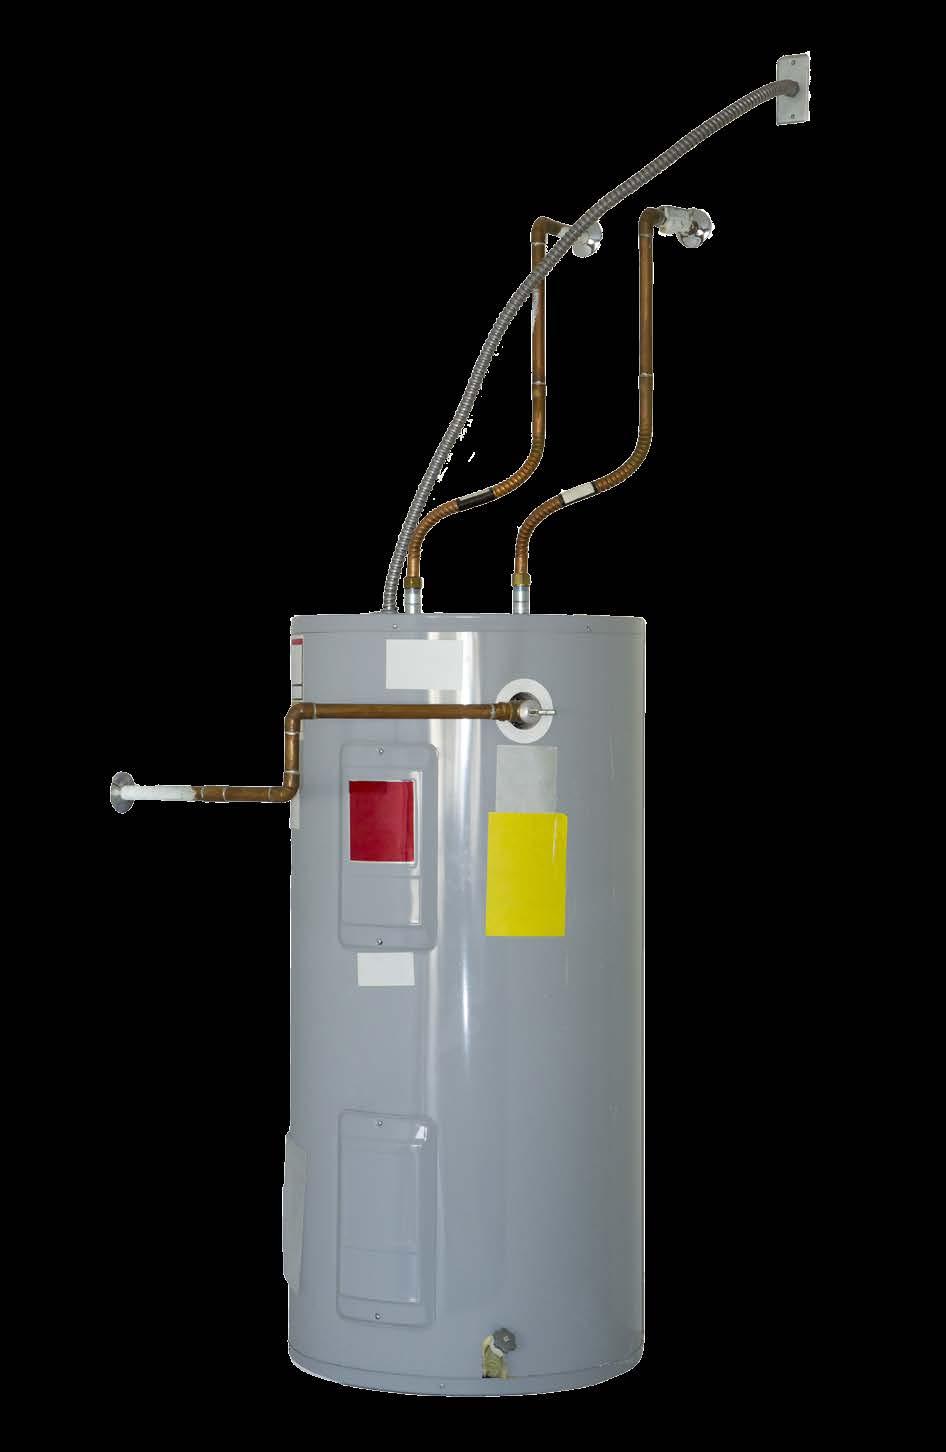 Hot Water Tanks The average lifespan of a hot water tank is 7-10 years, and it can be impacted by factors such as the construction quality of the tank and the amount of usage it incurs.